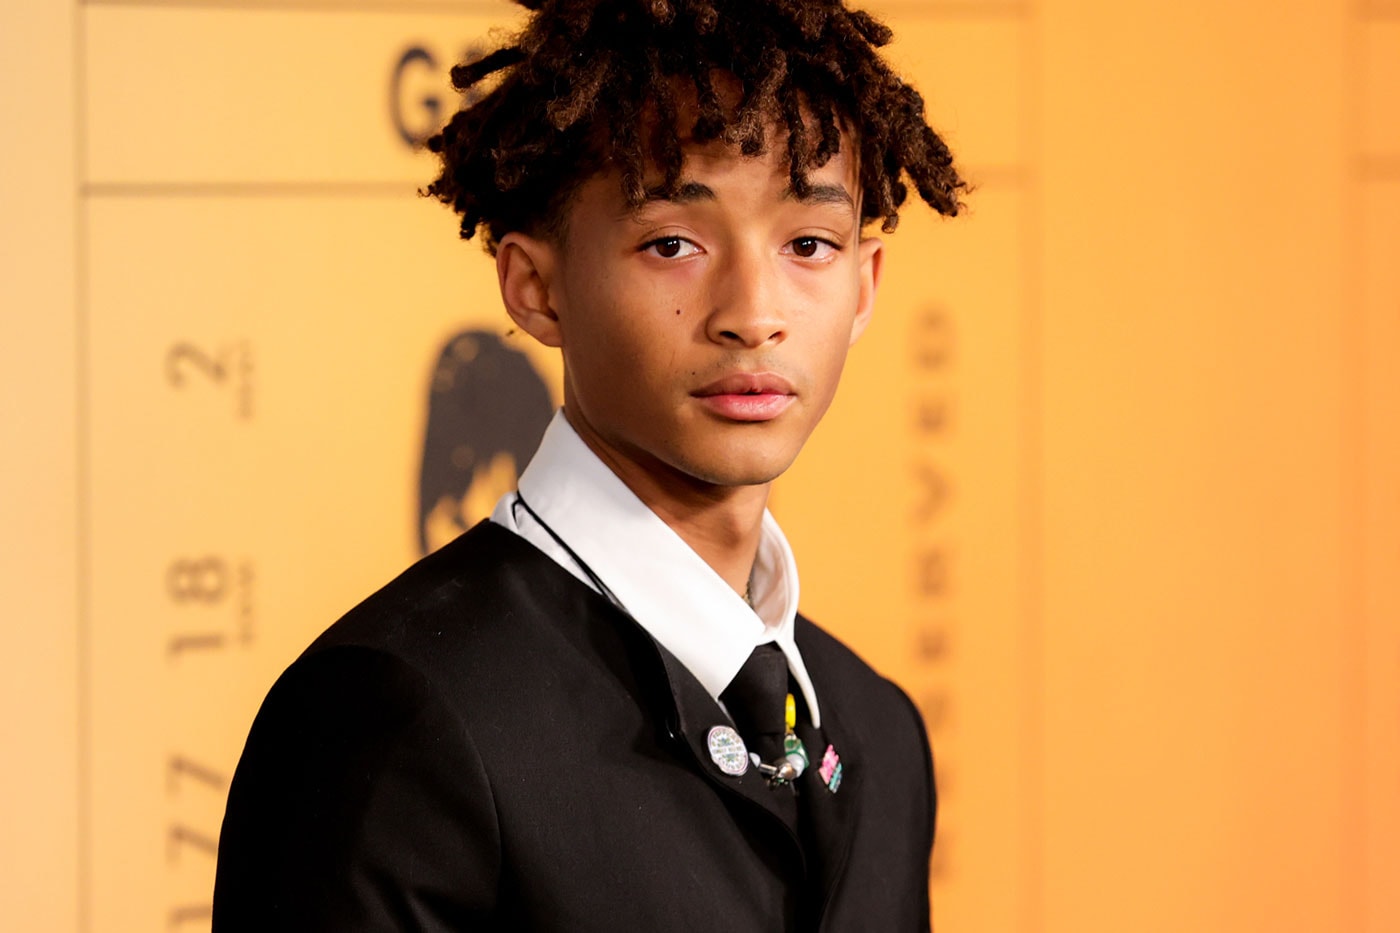 Jaden Smith Says That He Will Be "Gone" in Ten Years